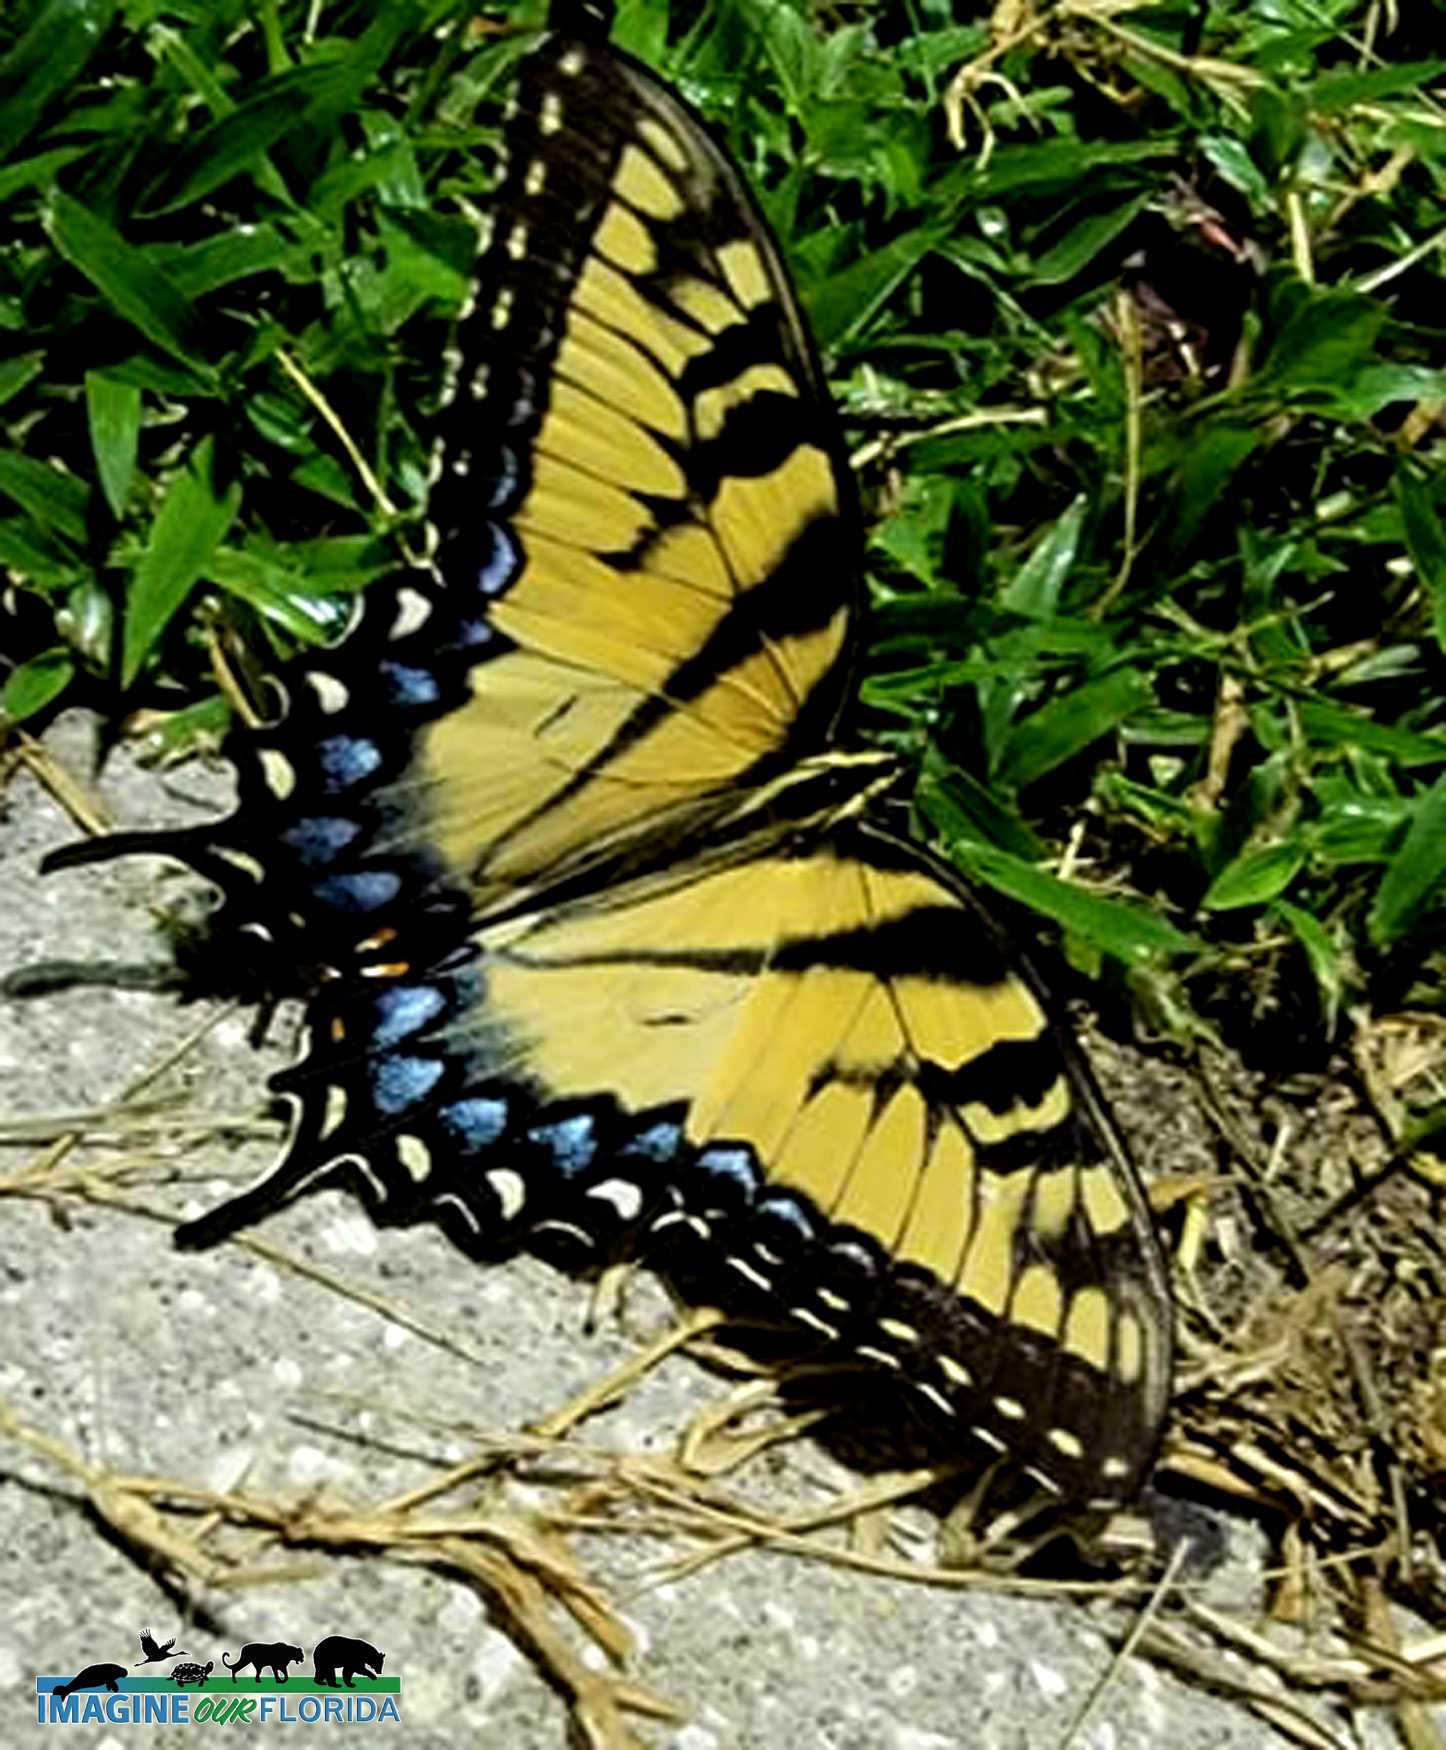 Eastern Tiger Swallowtail Butterfly Imagine Our Florida Inc